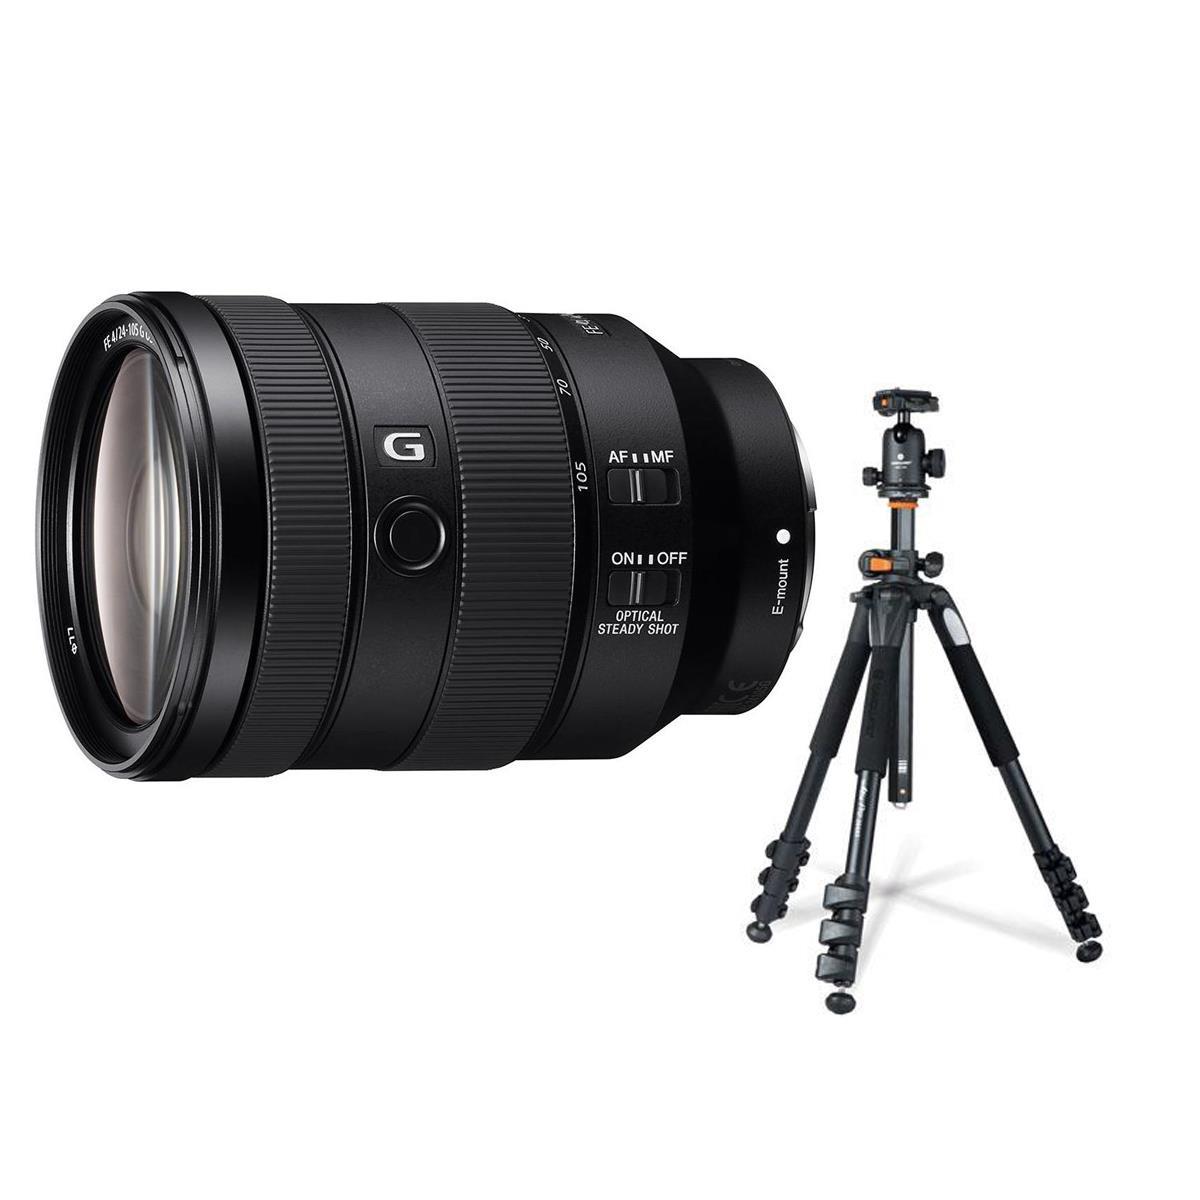 Image of Sony FE 24-105mm f/4 G OSS Lens for Sony E with Vanguard 264AT Tripod and Head